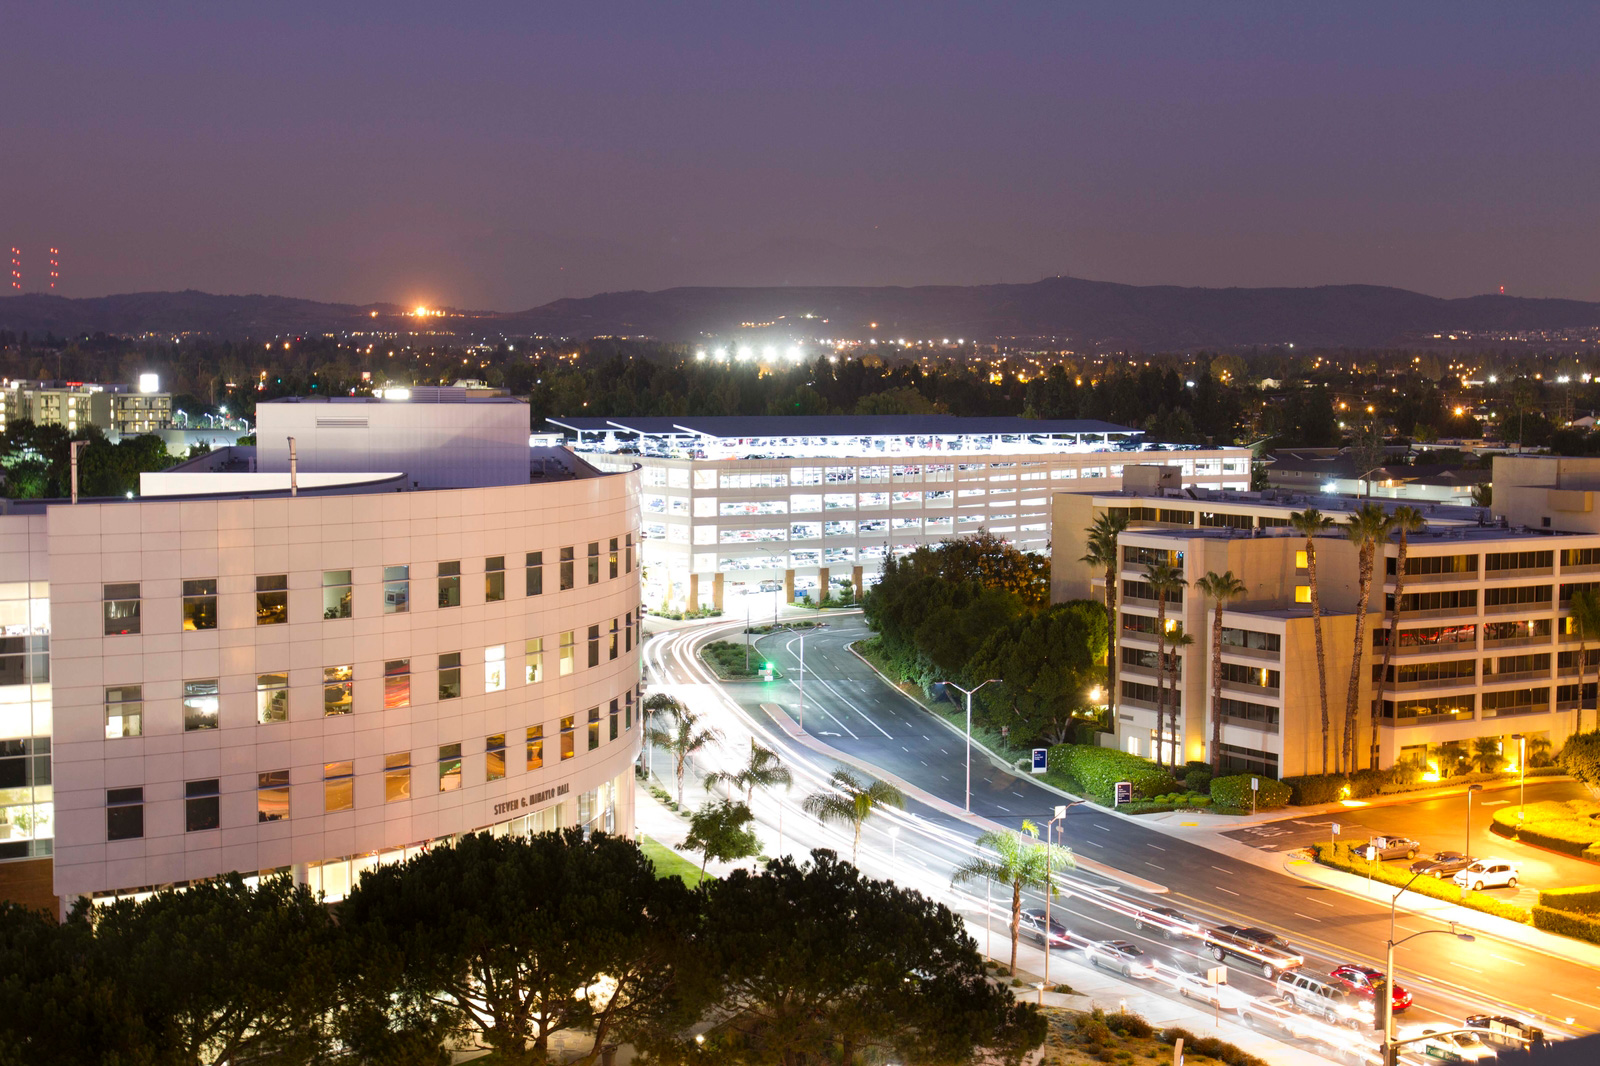 Aerial view of CSUF at night